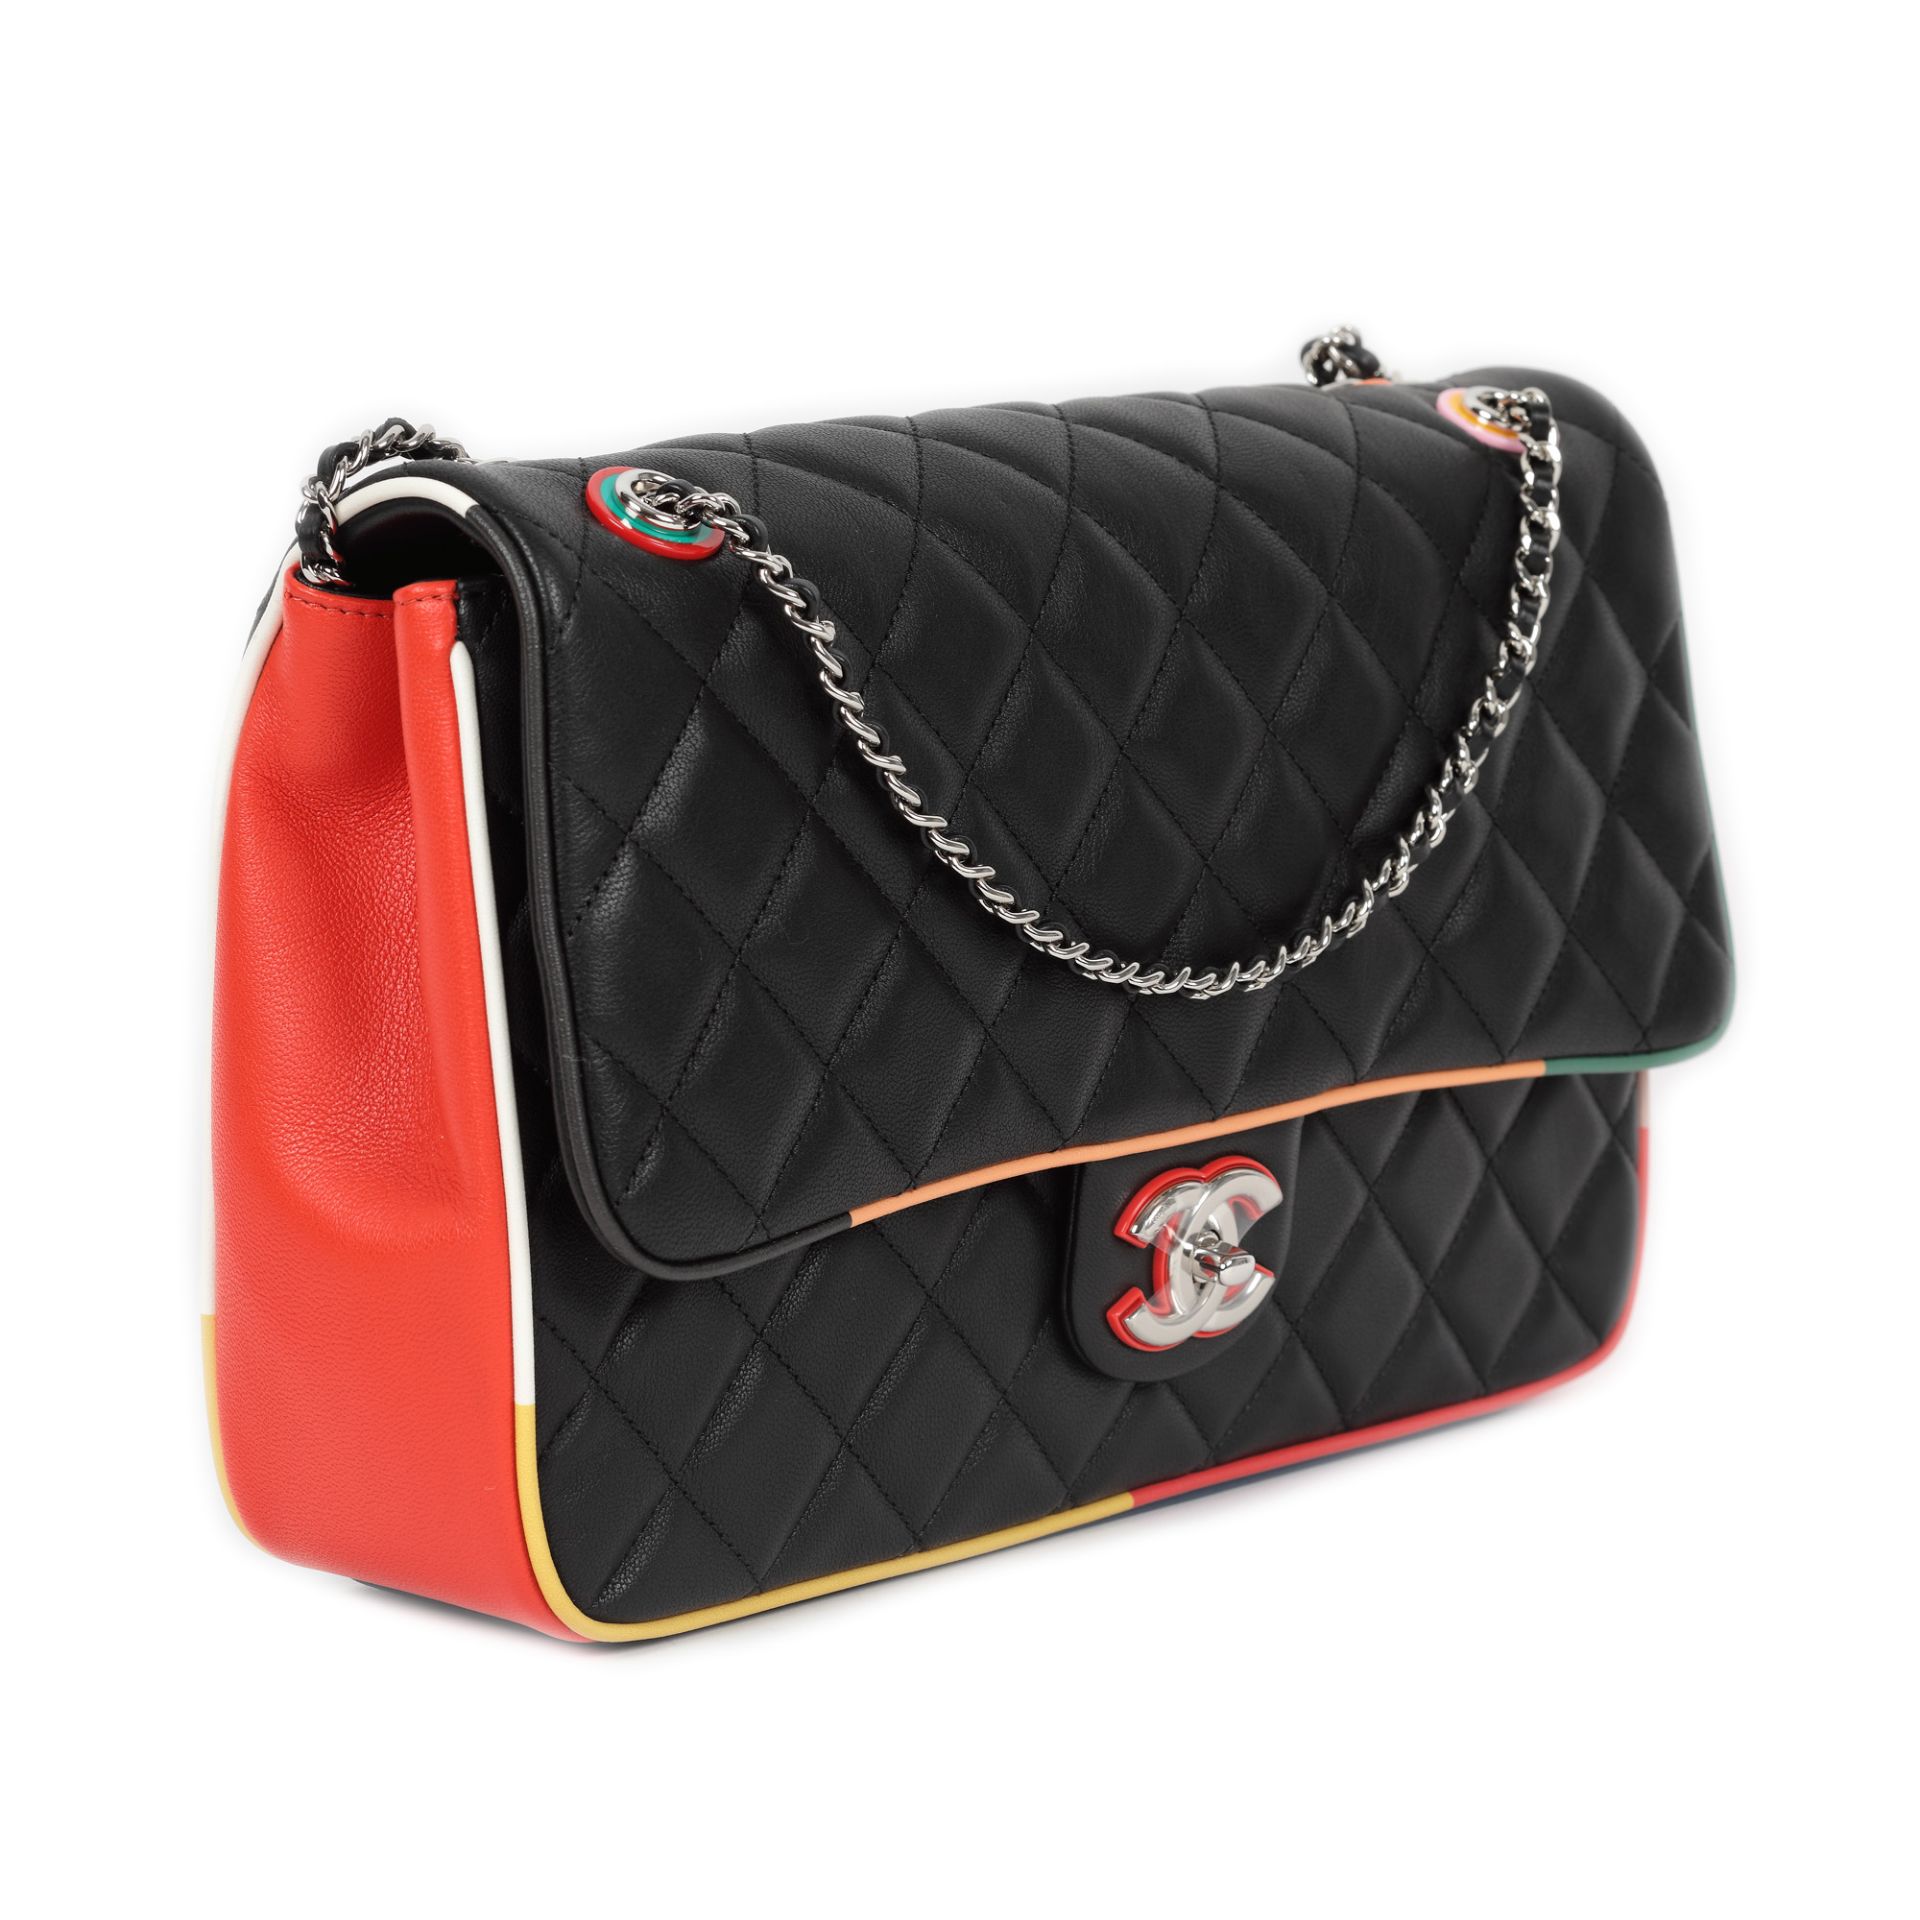 "Classic Flap Bag" - Chanel bag, quilted leather, black, with coloured resin details, authenticity c - Image 2 of 6